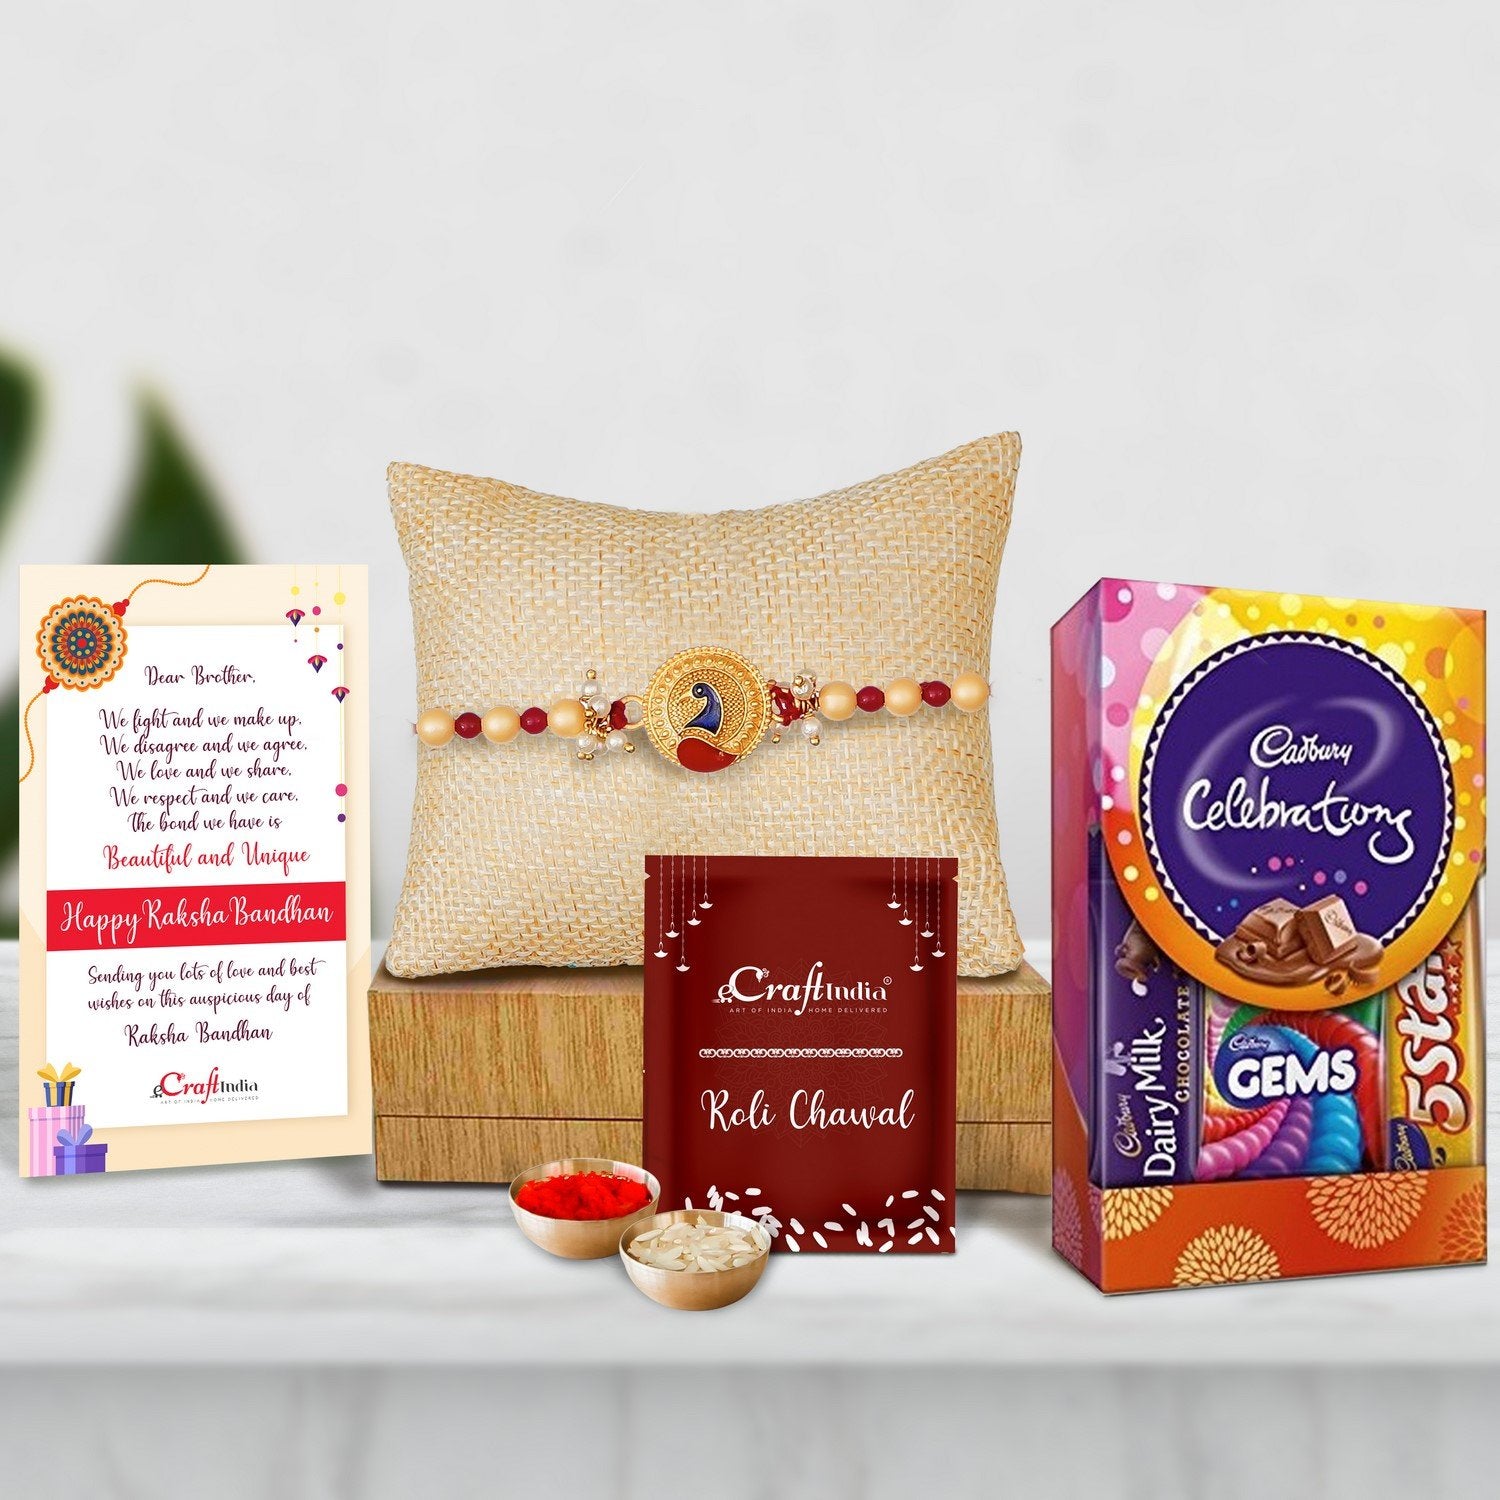 Designer Peacock Rakhi with Cadbury Celebrations Gift Pack of 5 Assorted Chocolates and Roli Chawal Pack, Best Wishes Greeting Card